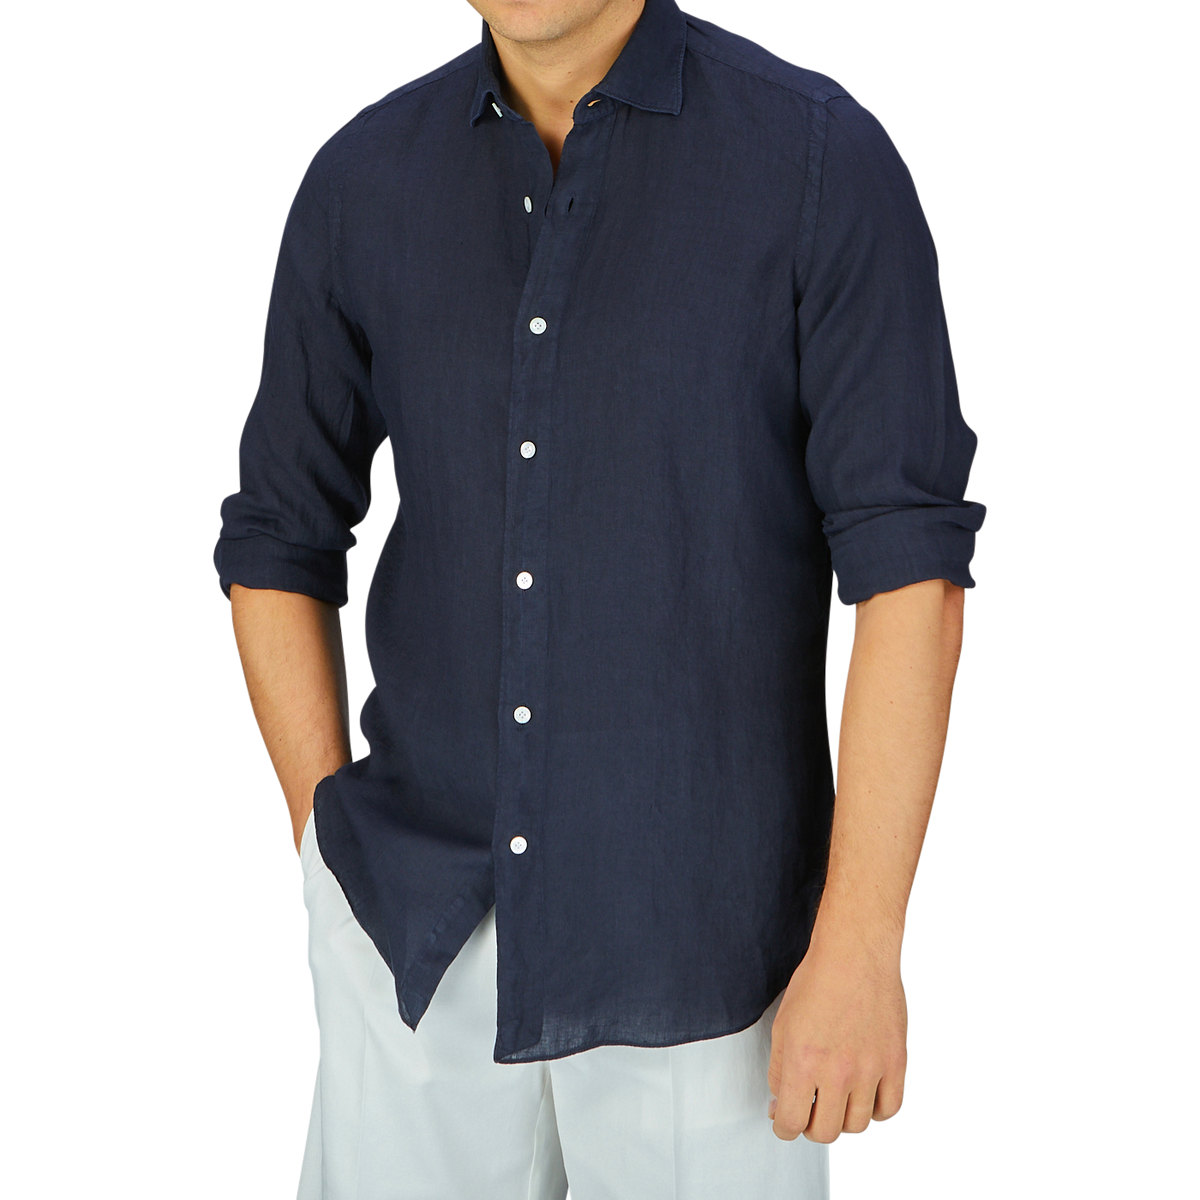 A person wearing a Finamore Navy Blue Linen Casual Shirt and white pants against a gray background.